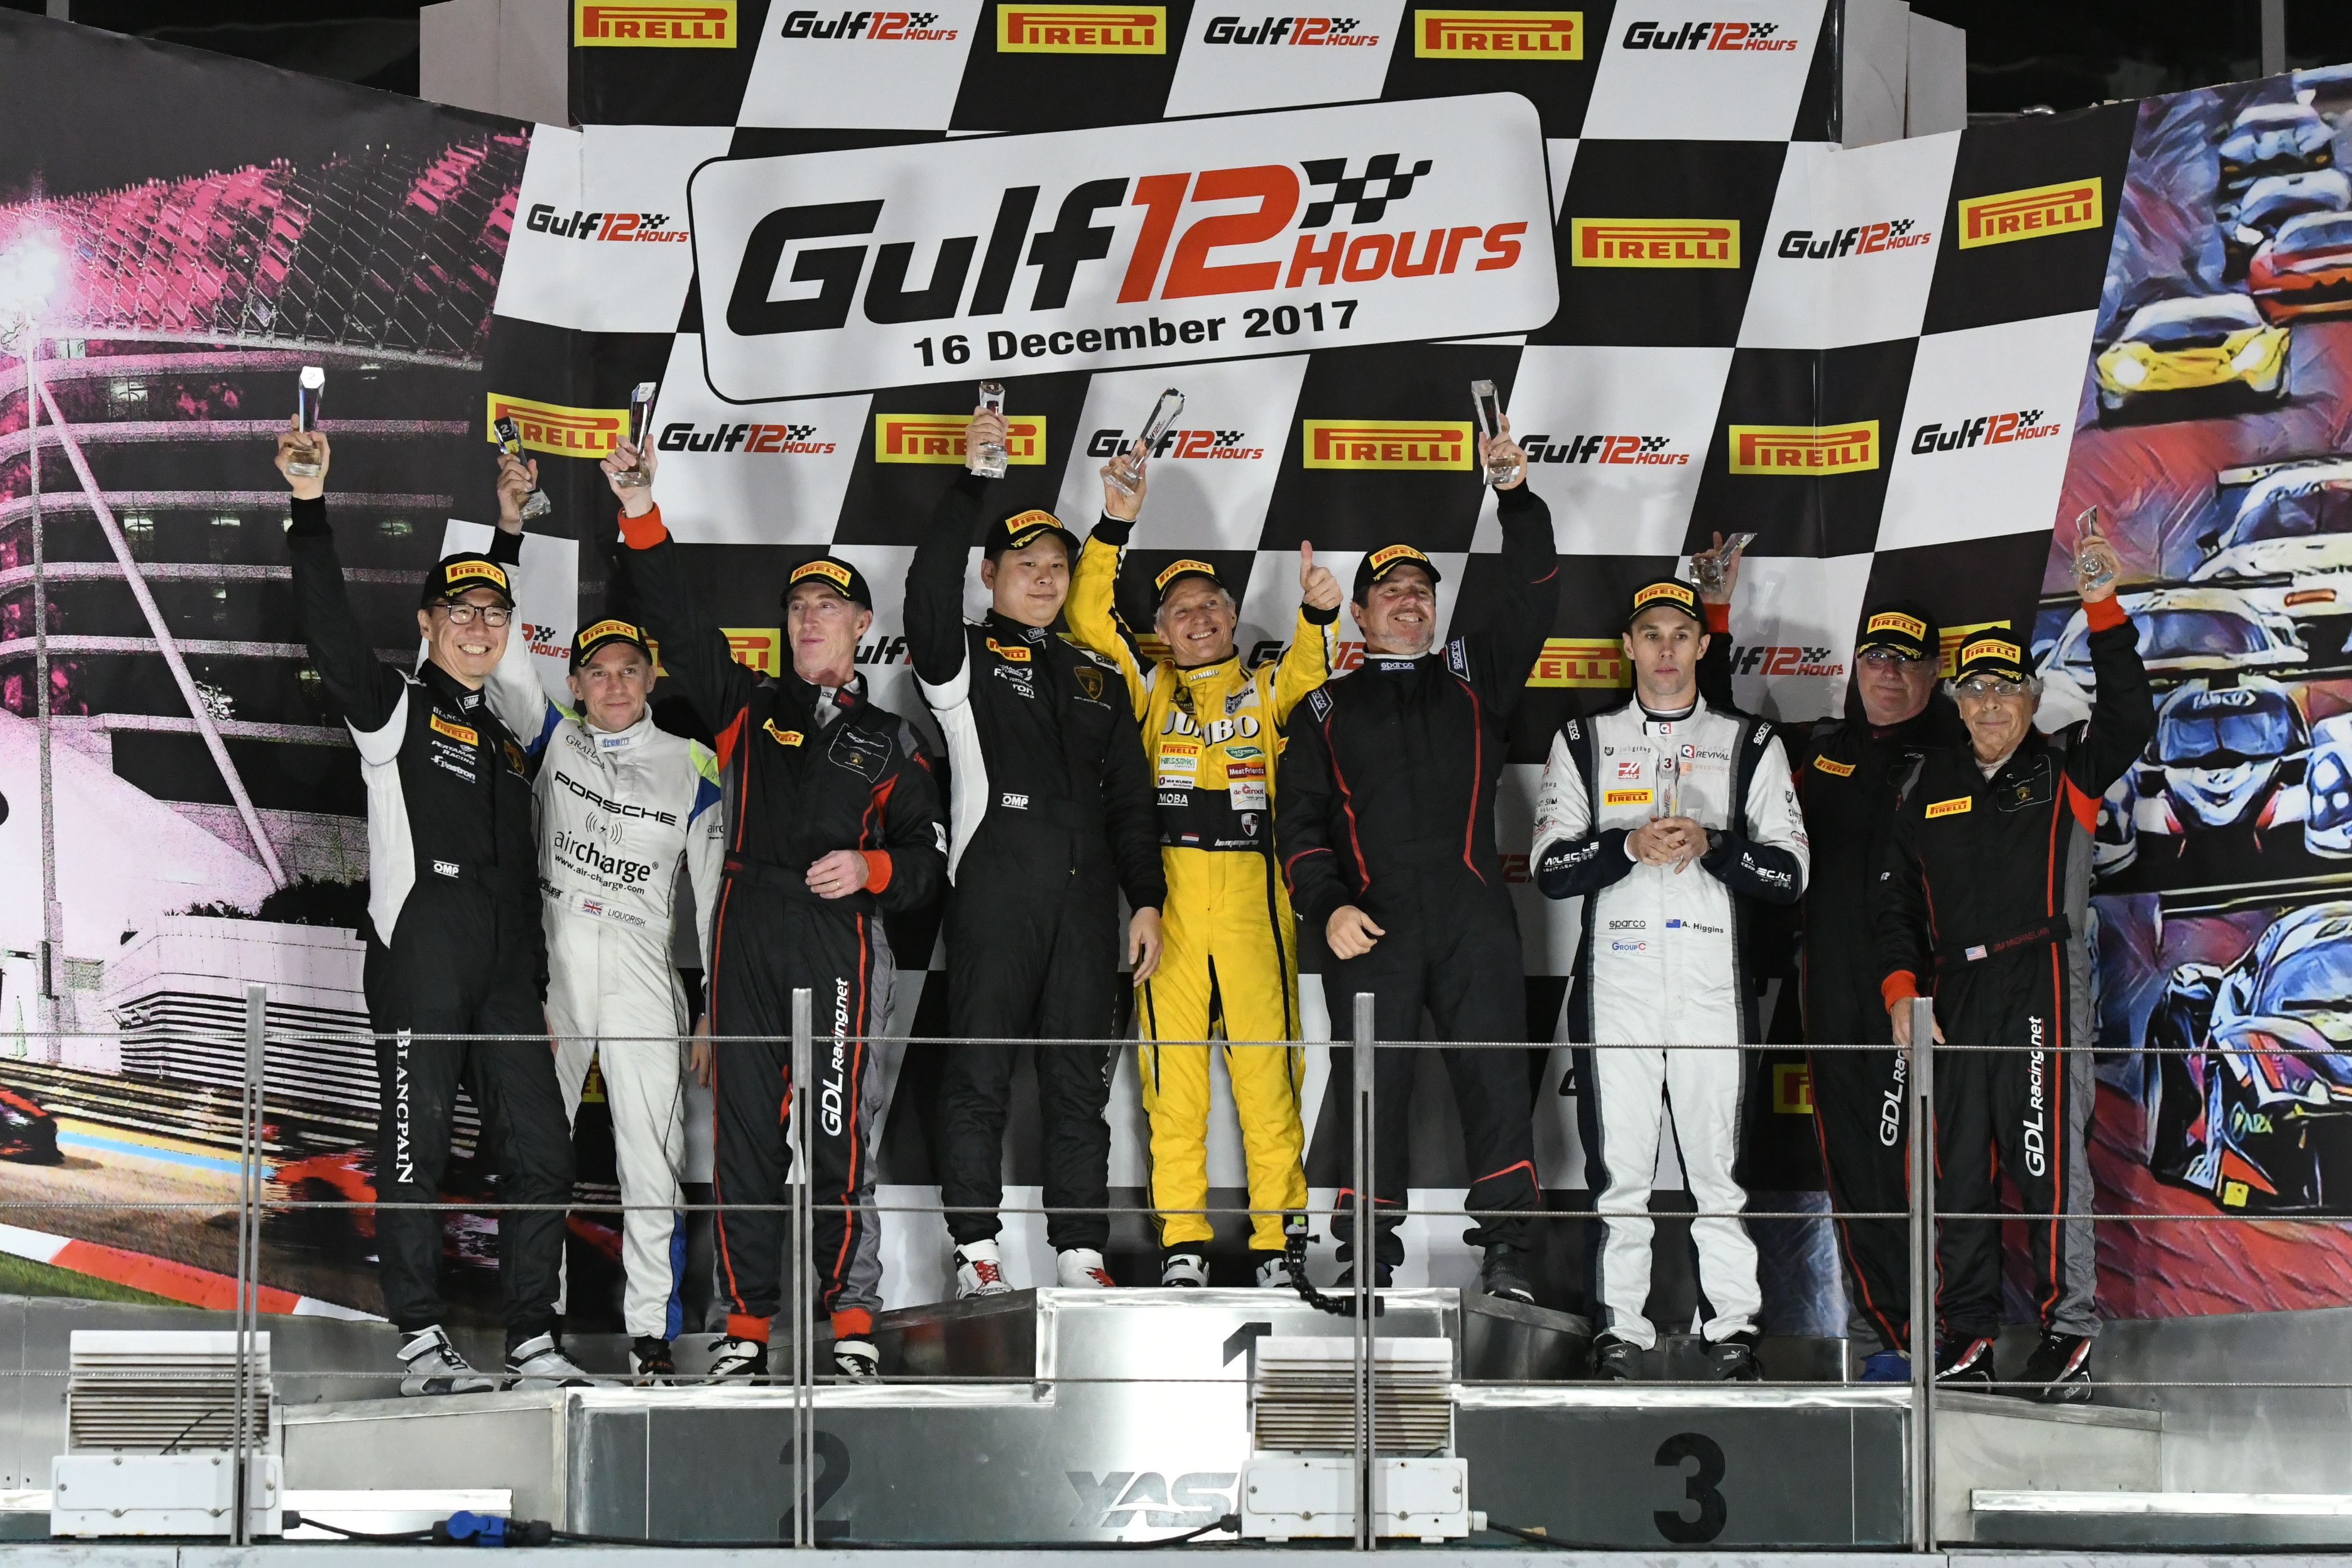 Target shine in the 12 Hours of Yas Marina